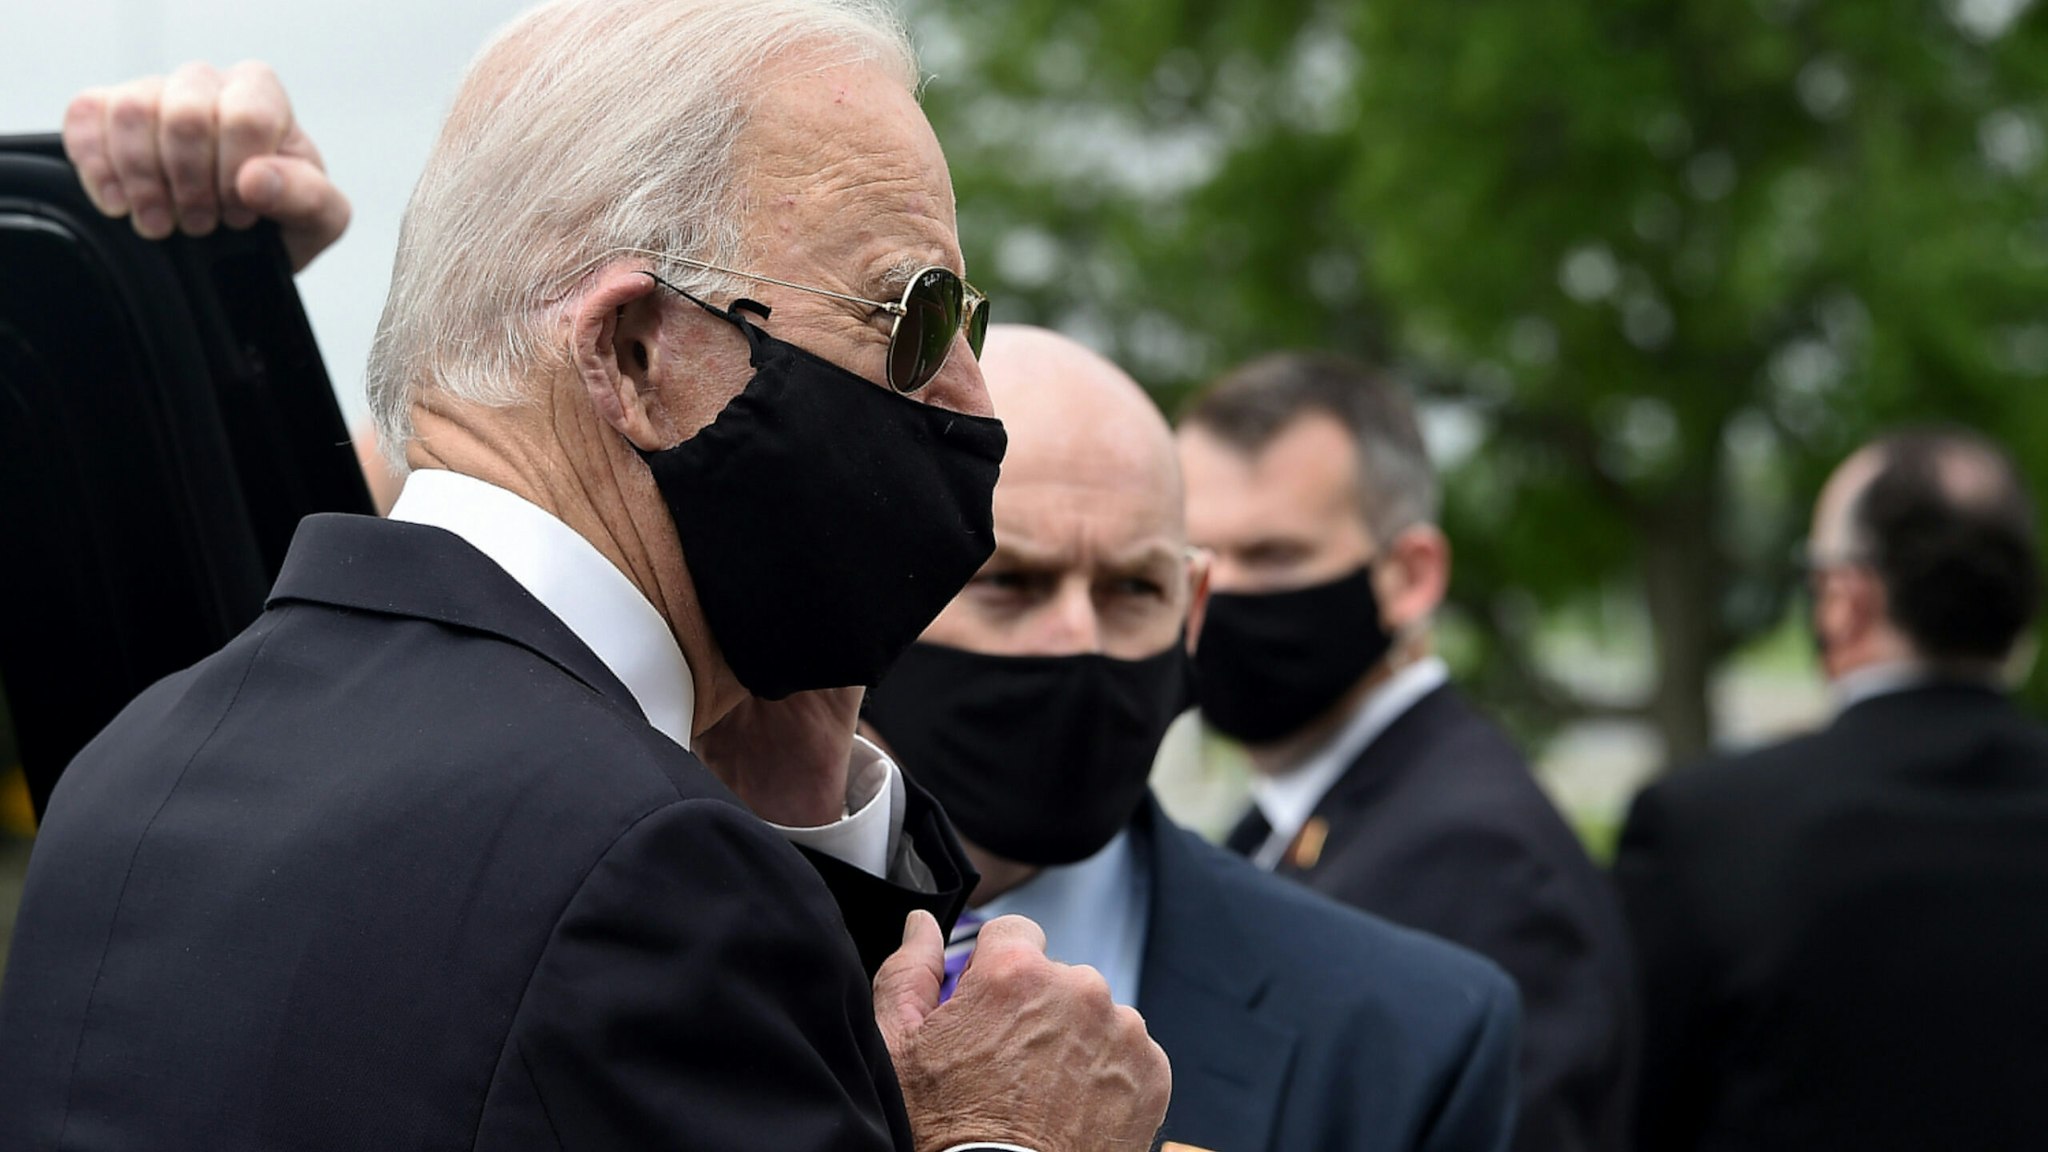 Democratic presidential candidate and former US Vice President Joe Biden (L) departs the Delaware Memorial Bridge Veteran's Memorial Park after paying respects to fallen service members in New Castle, Delaware, May 25, 2020.